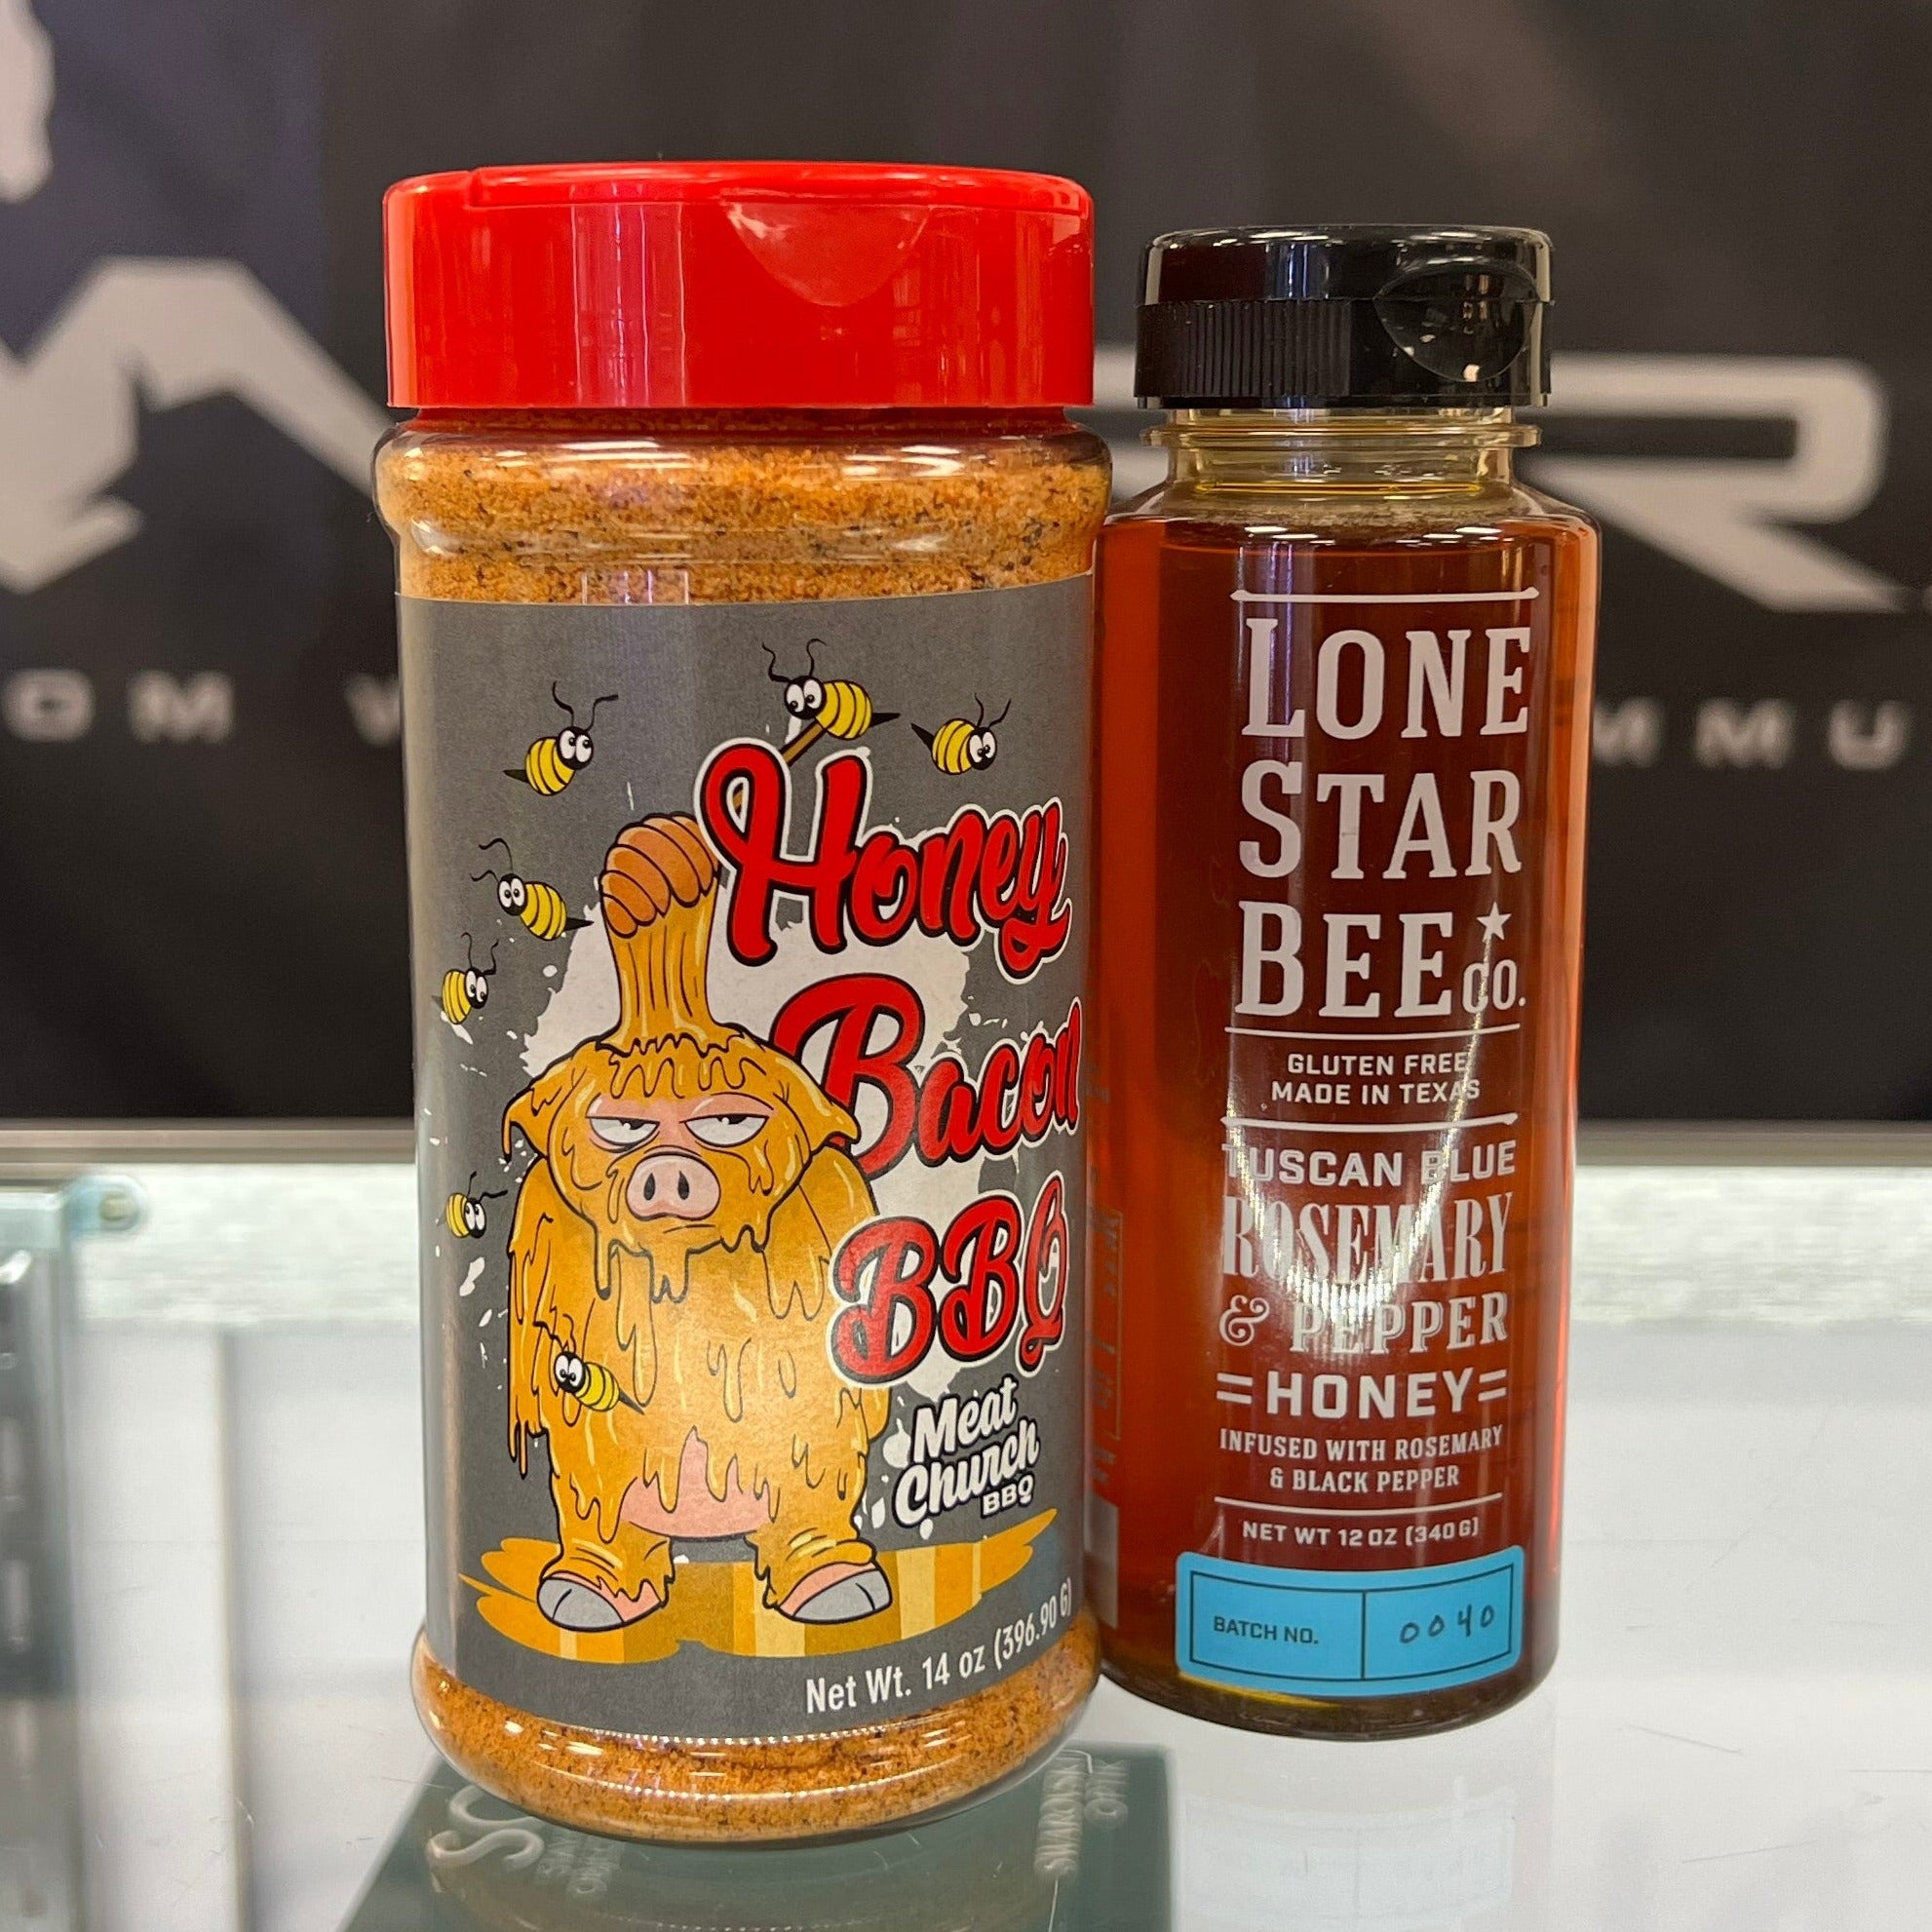 Thanksgiving Bundle (Meat Church Honey Bacon BBQ, Lone Star Bee Rosemary & Pepper Honey) - Pacific Flyway Supplies